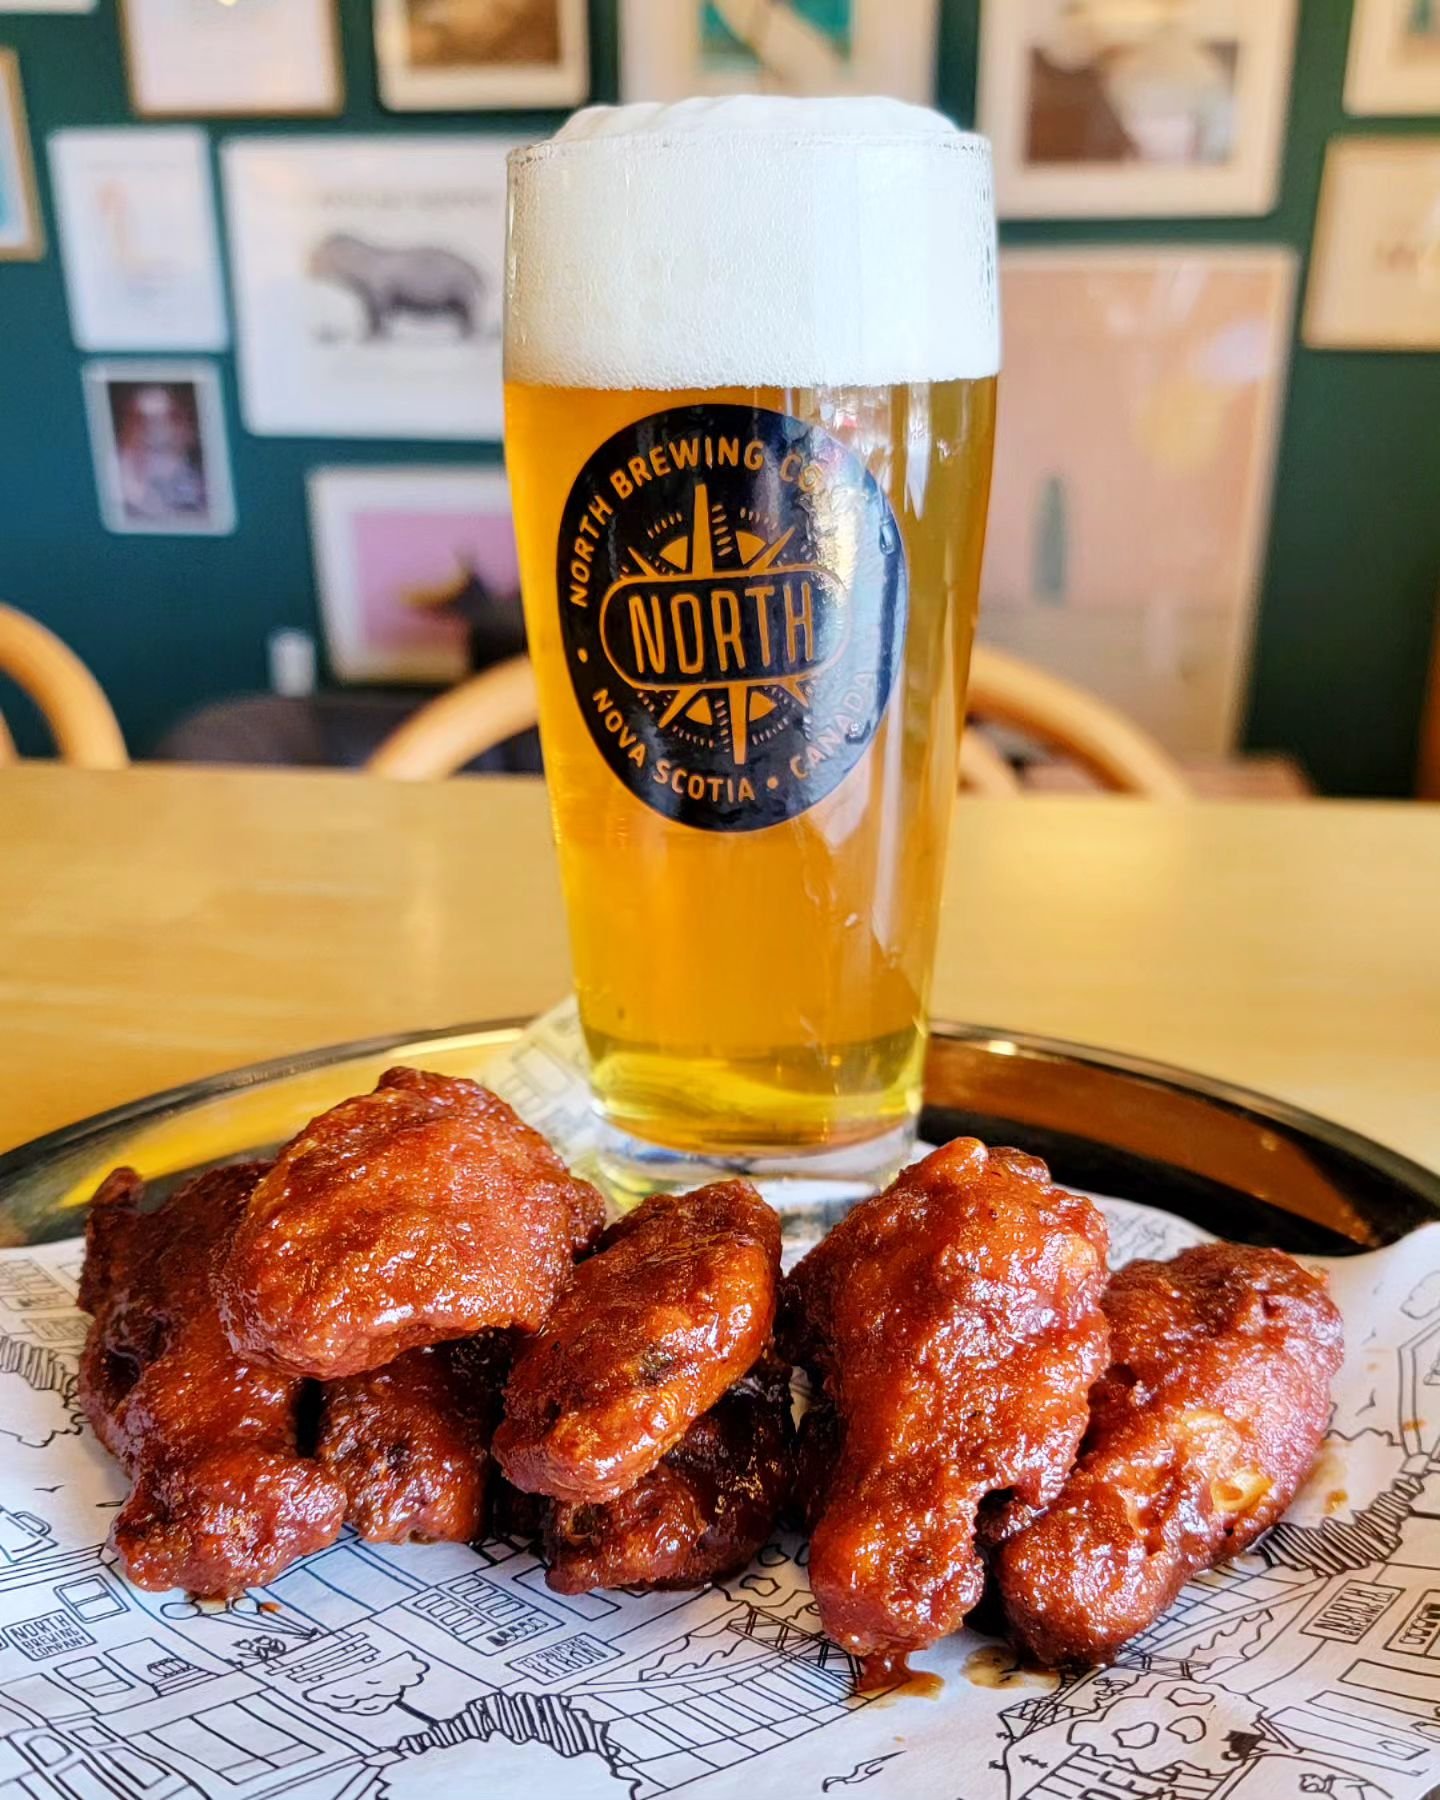 || WING WEDNESDAYS: $10 WINGS ALL DAY ||

Every Wednesday, our hand breaded wings are only $10! We also have a feature 13oz pour for $5.75.

This week's feature sauce is: Everyone's favourite maple bourbon BBQ sauce.

Image description: a photo of a 